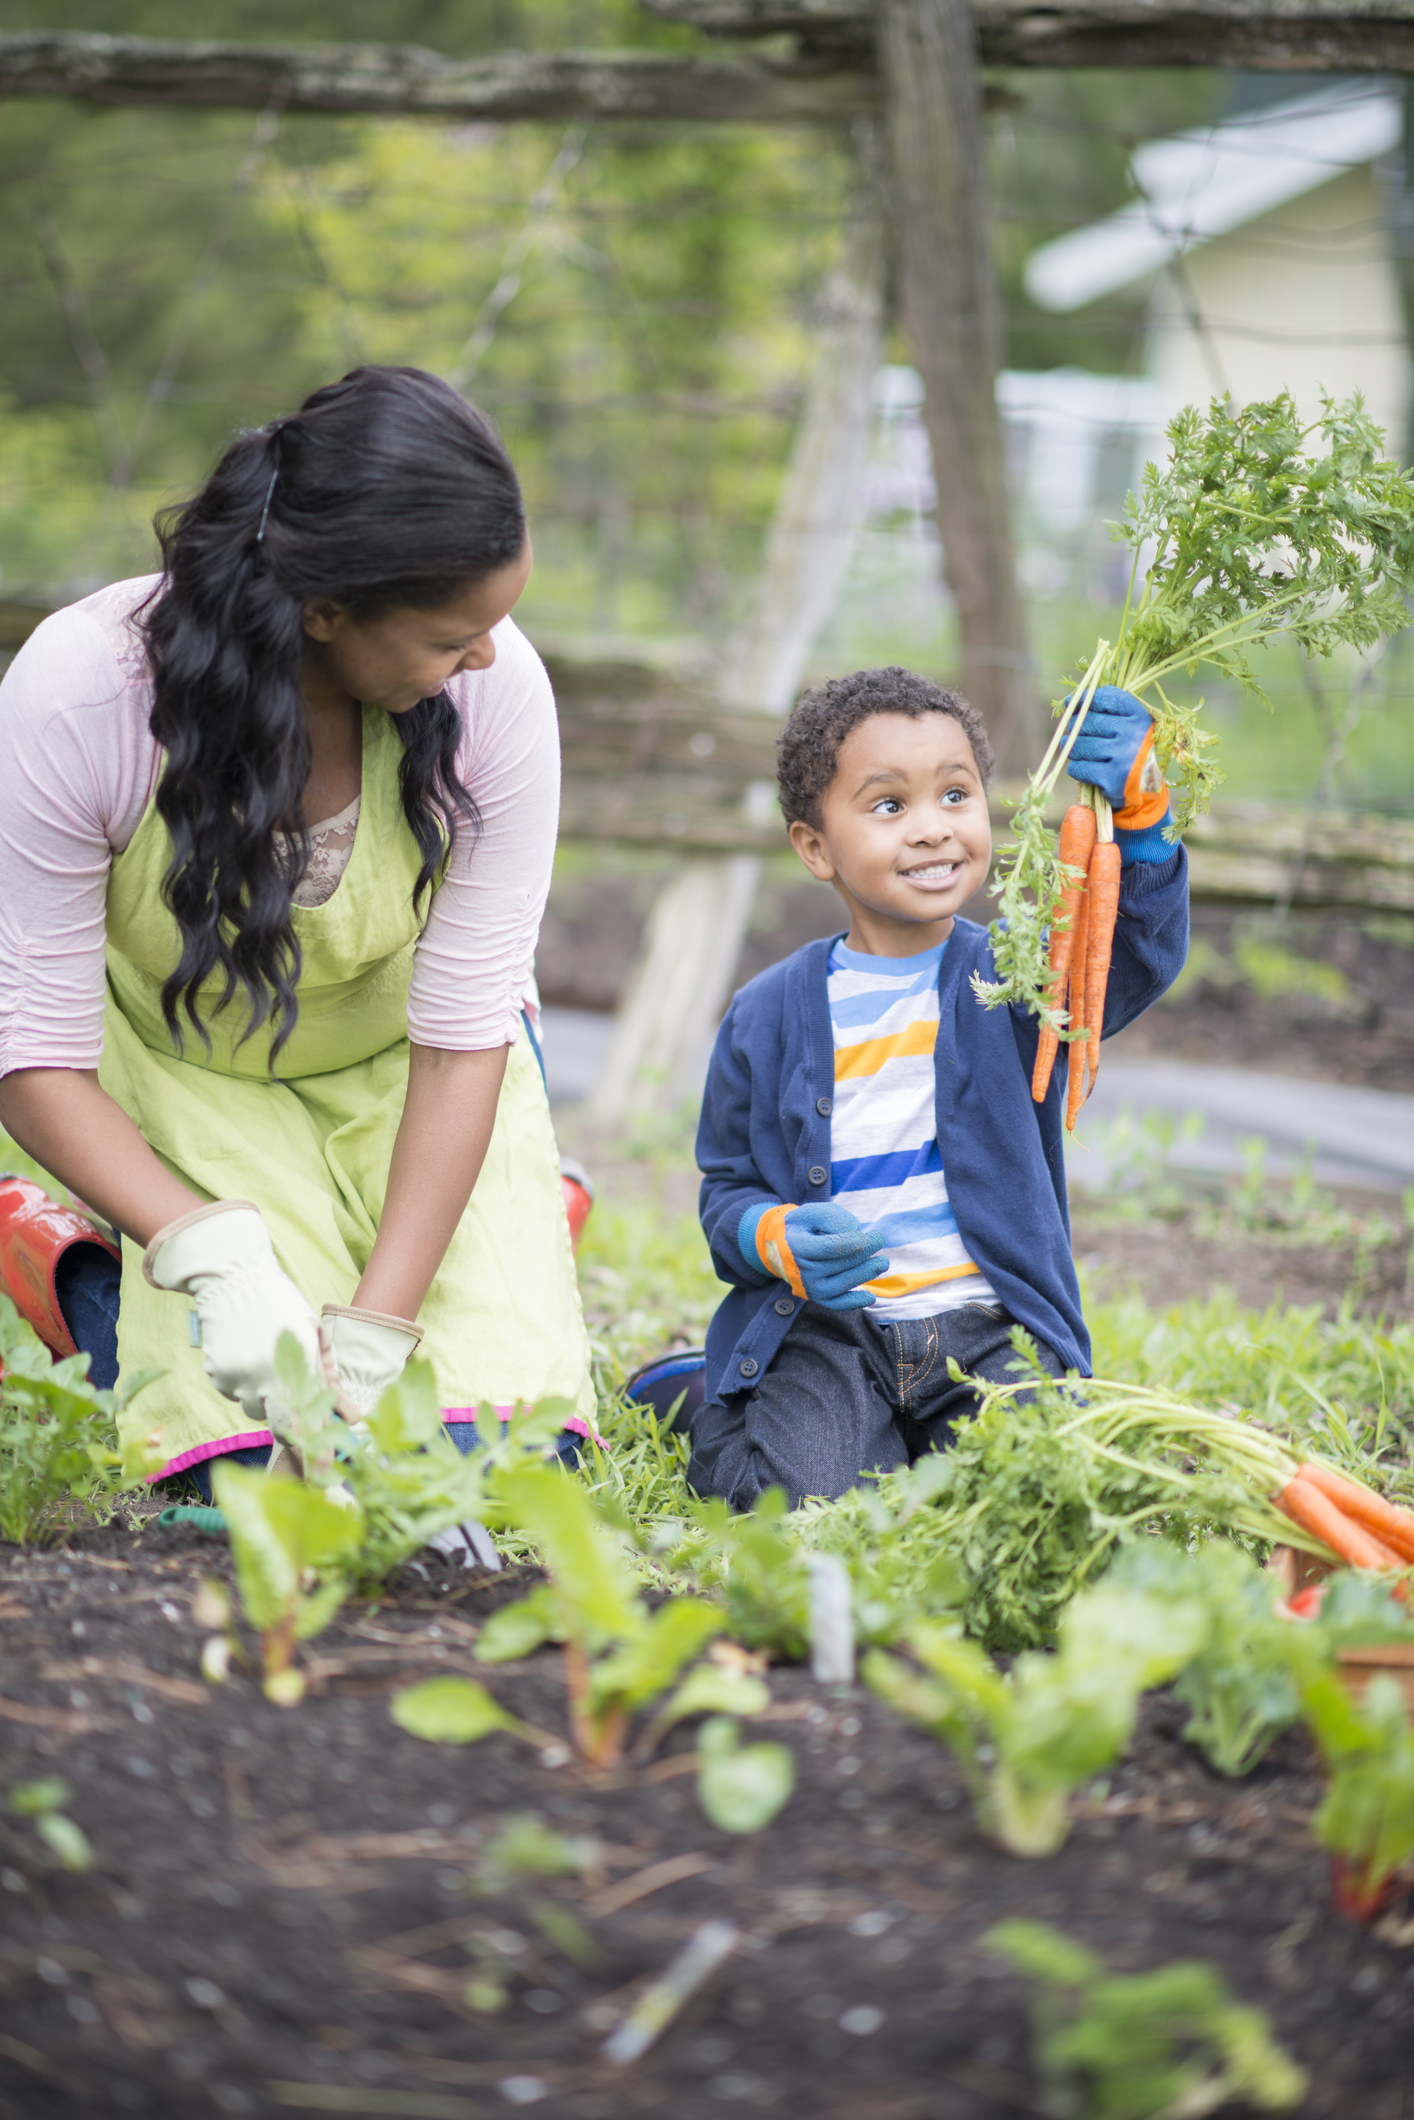 Top Tips from our Chiro to Survive Gardening Season